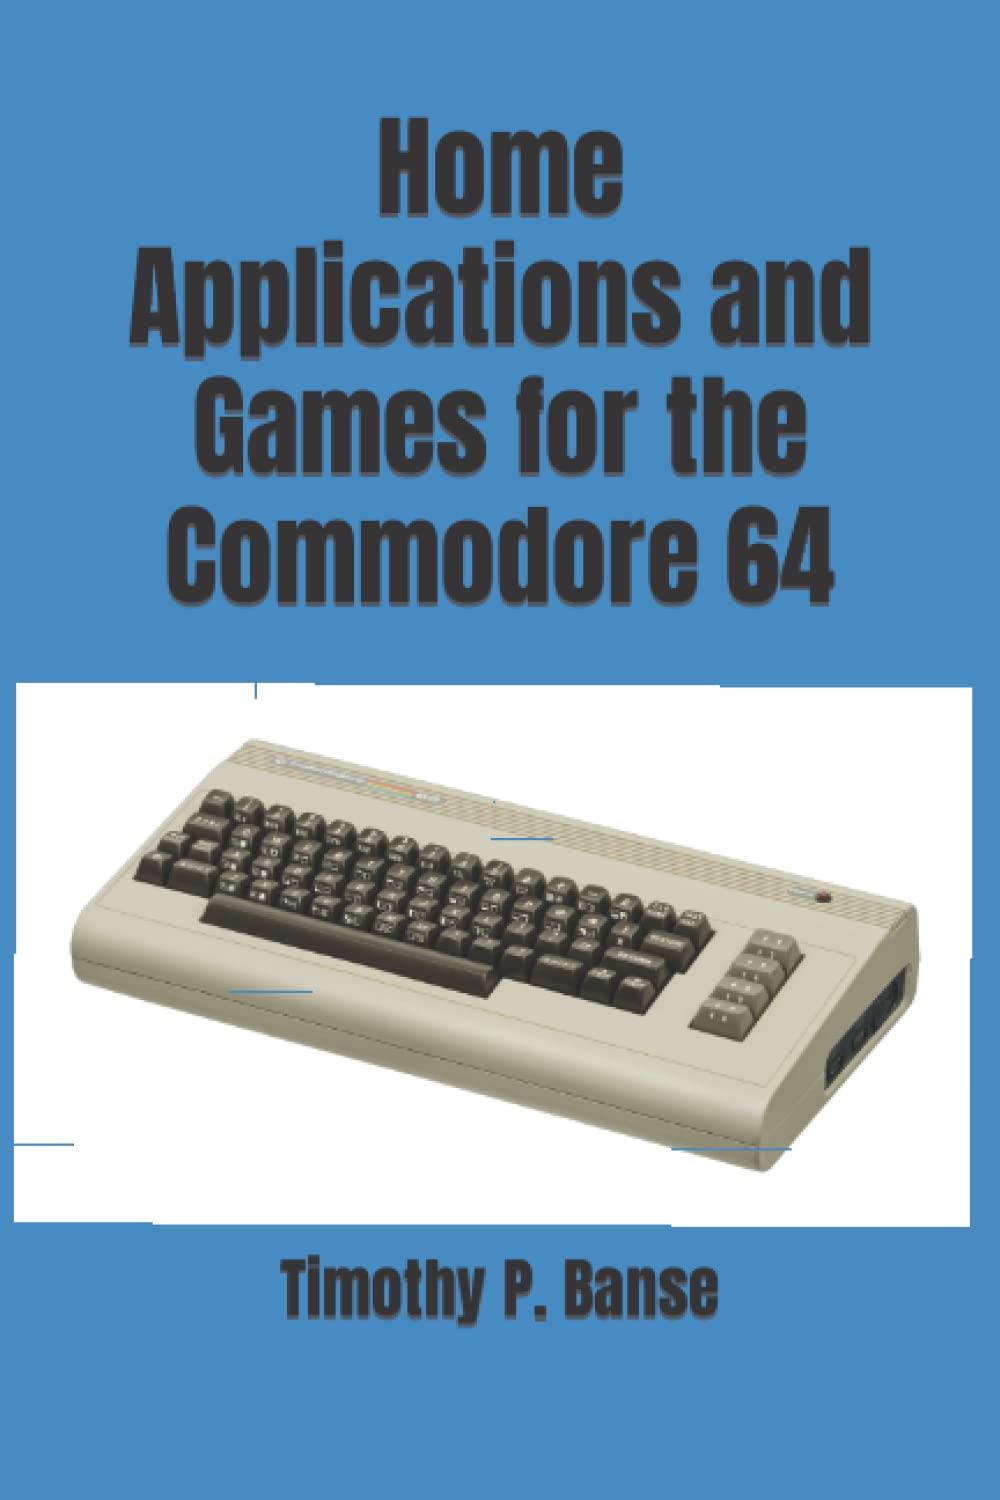 home applications and games for the commodore 1st edition timothy p. banse 0934523908, 978-0934523905